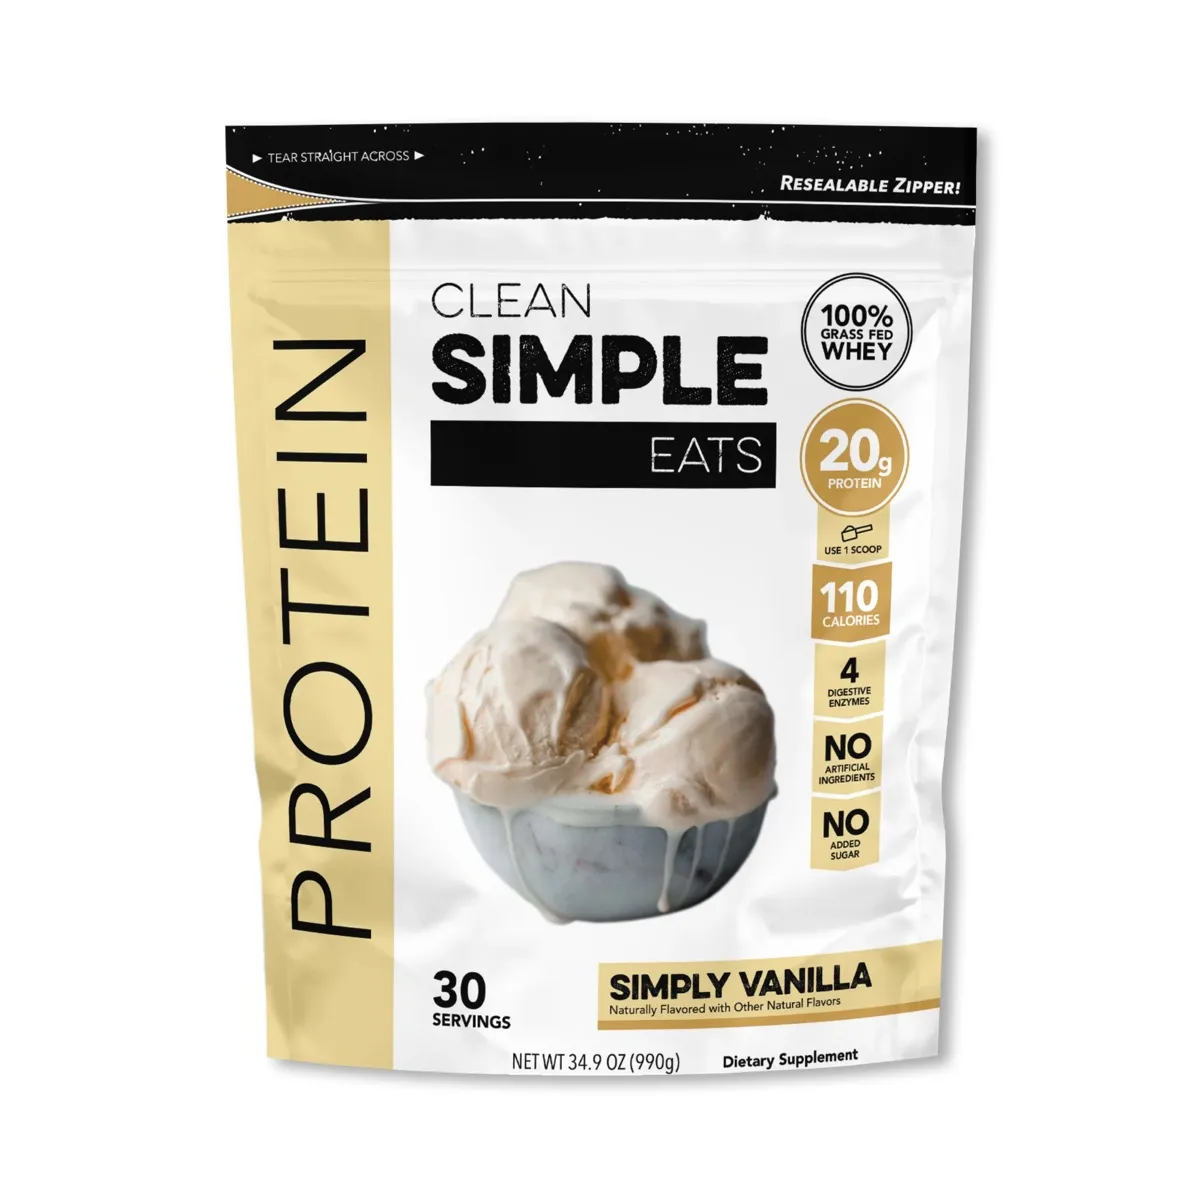 Clean Simple Eats protein supplement